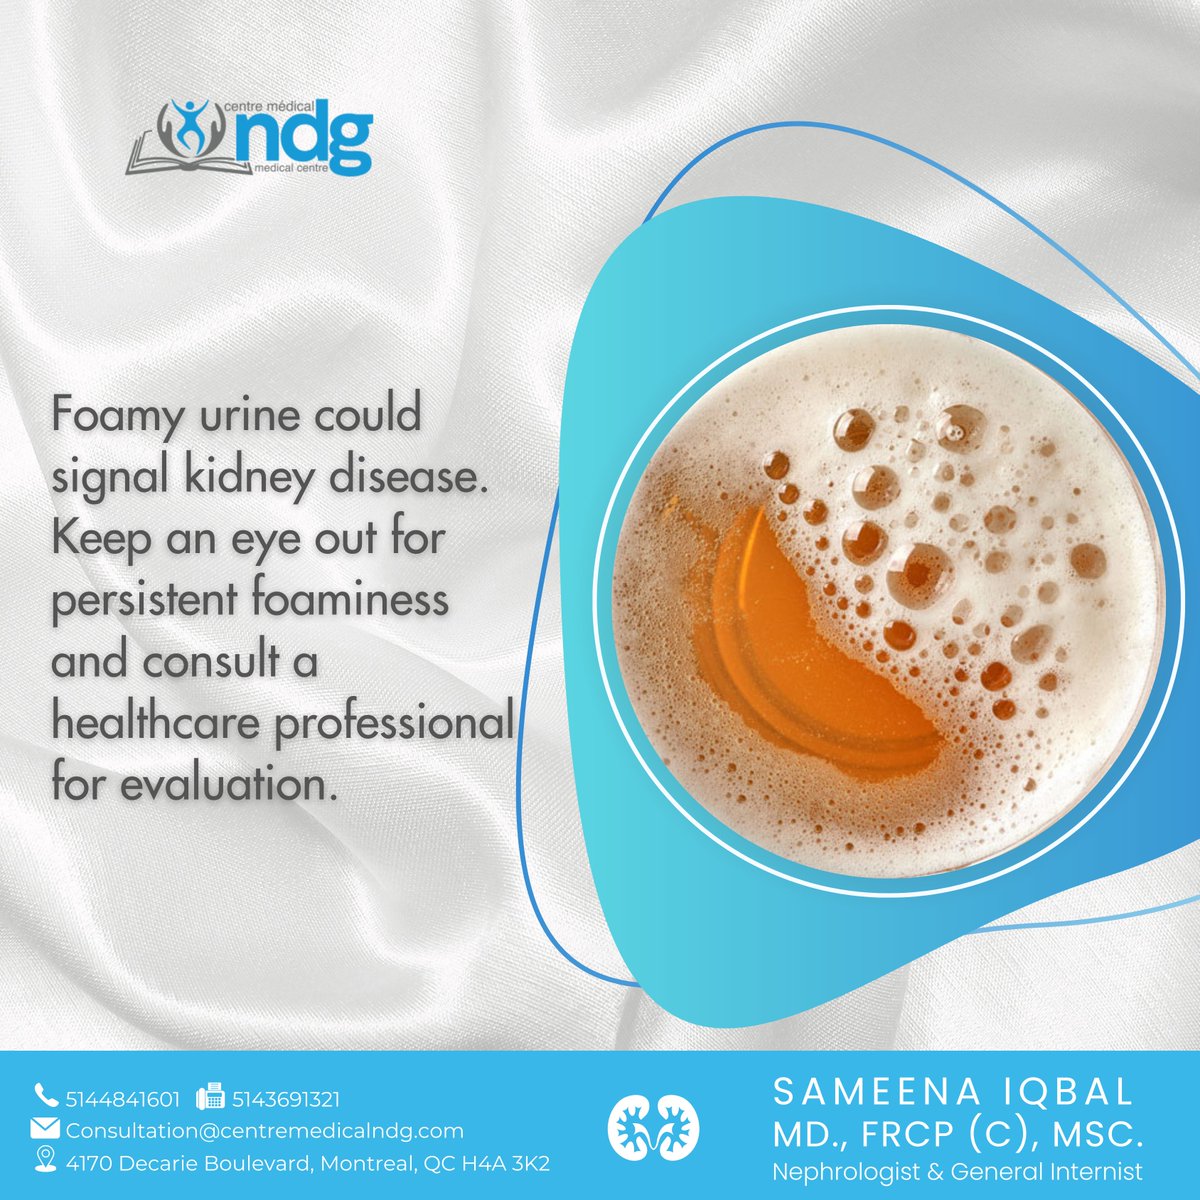 Foamy urine can signal kidney disease, particularly if it persists. This foaminess may indicate proteinuria, where excess protein leaks into urine due to impaired kidney function.

#KidneyHealth #FoamyUrine #Proteinuria #KidneyDisease #HealthAwareness #UrineHealth #RenalHealth